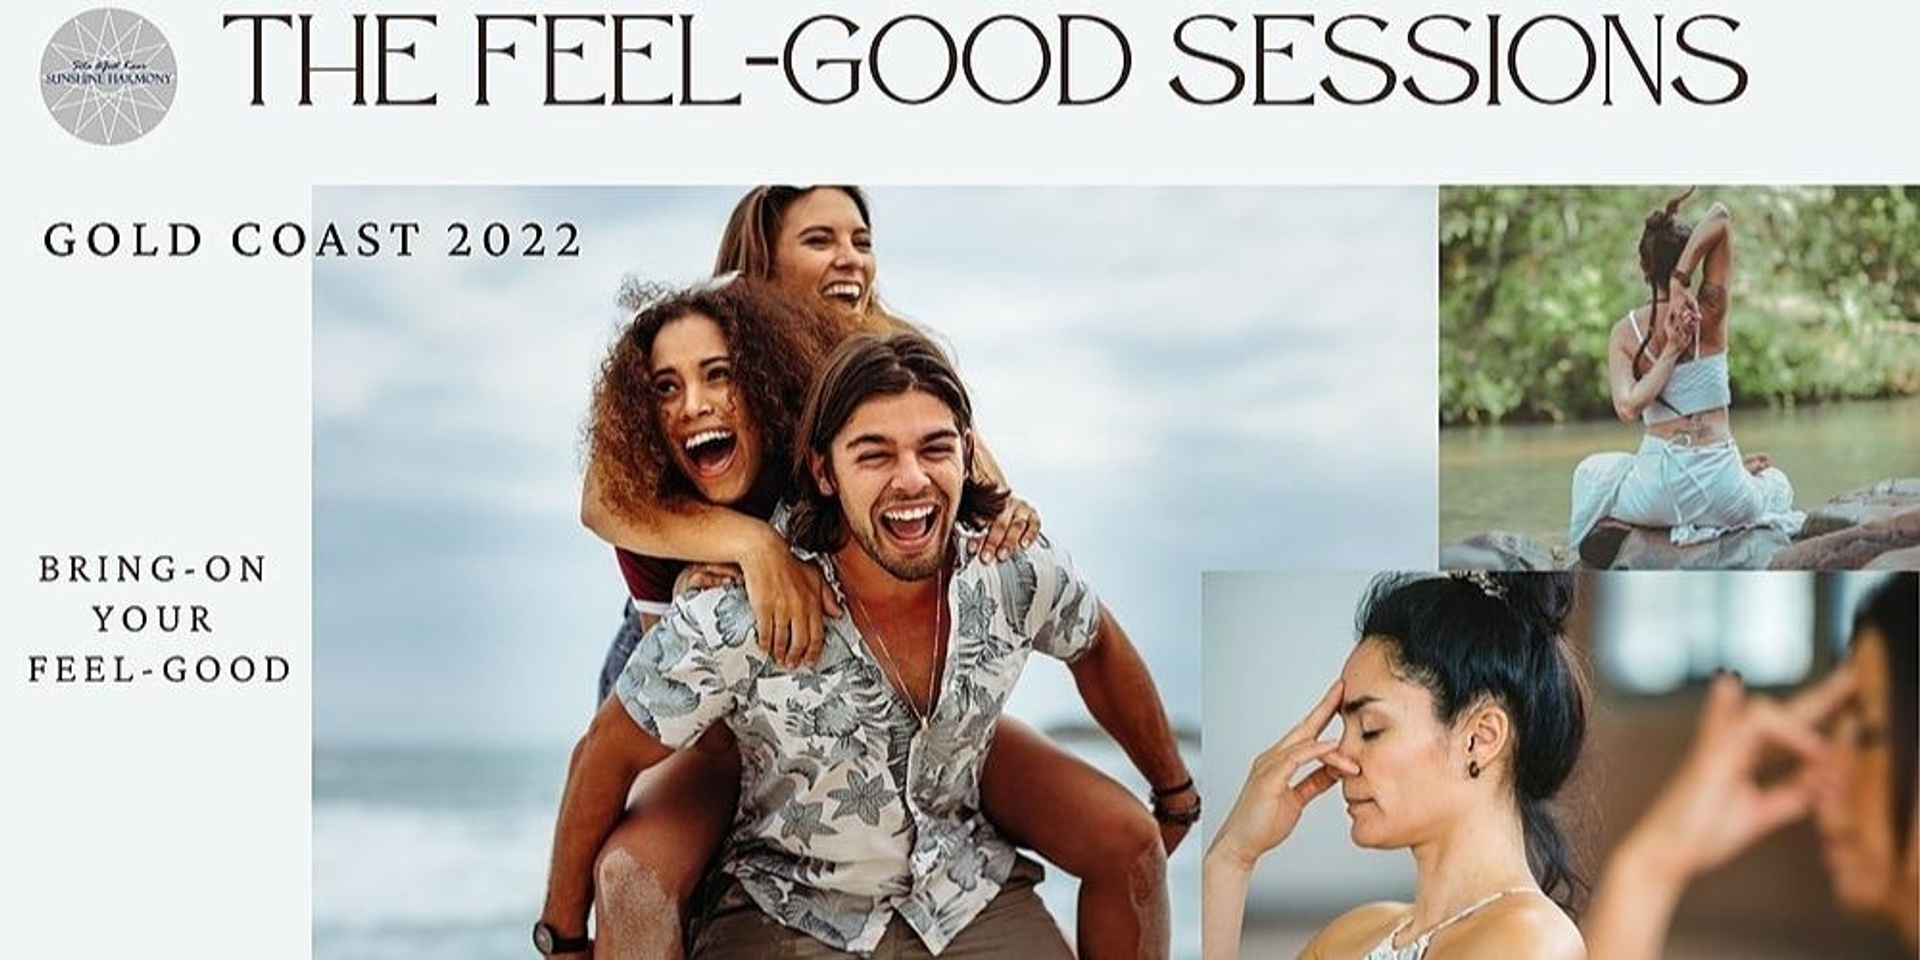 The Feel-Good Sessions: A Yoga Experience